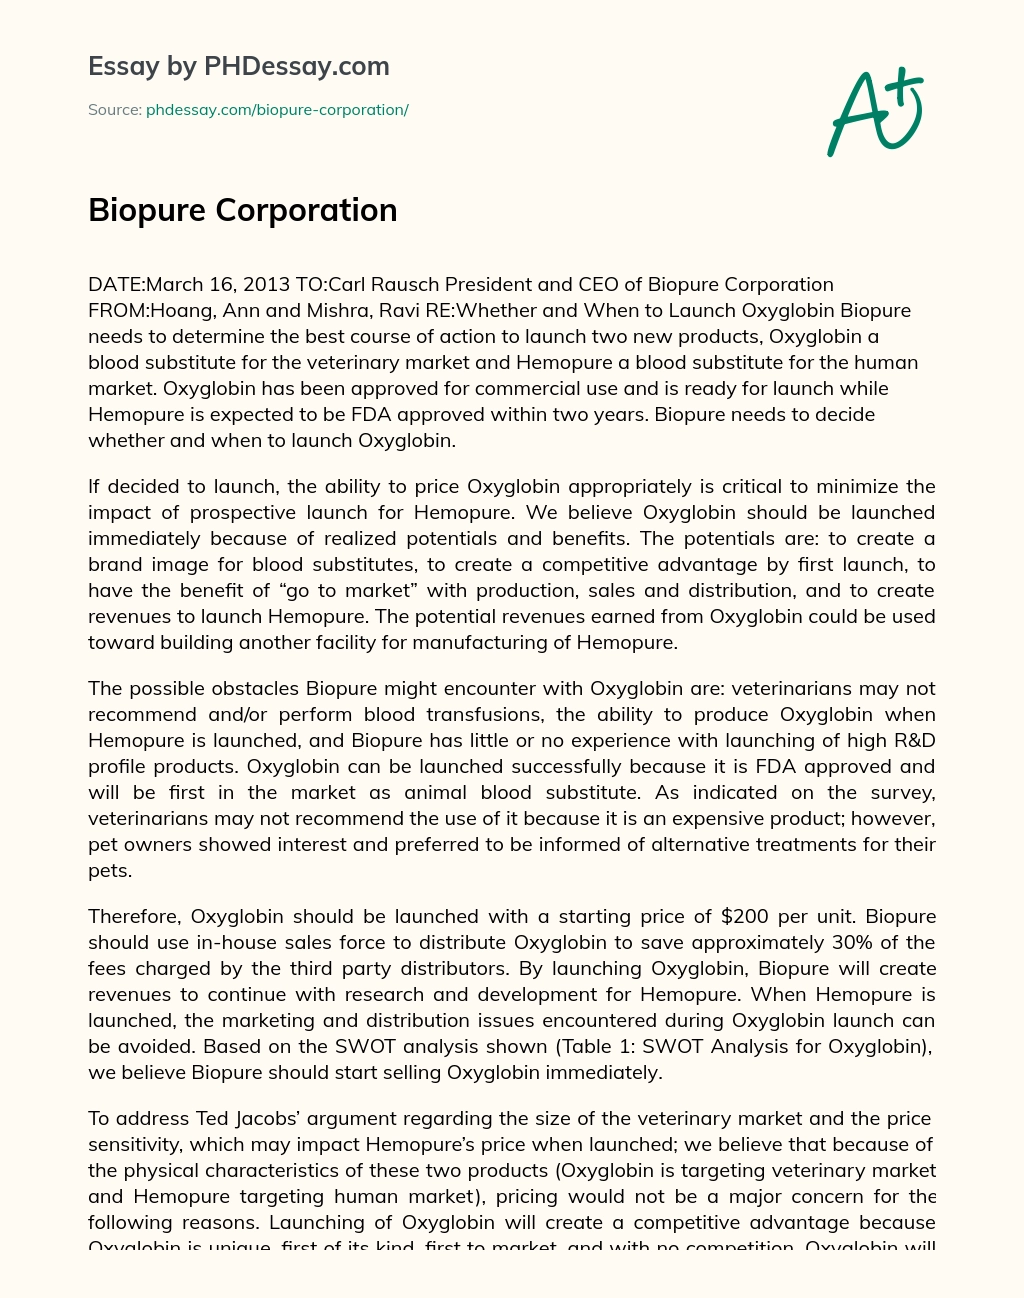 Biopure Corporation: Whether and When to Launch Oxyglobin essay